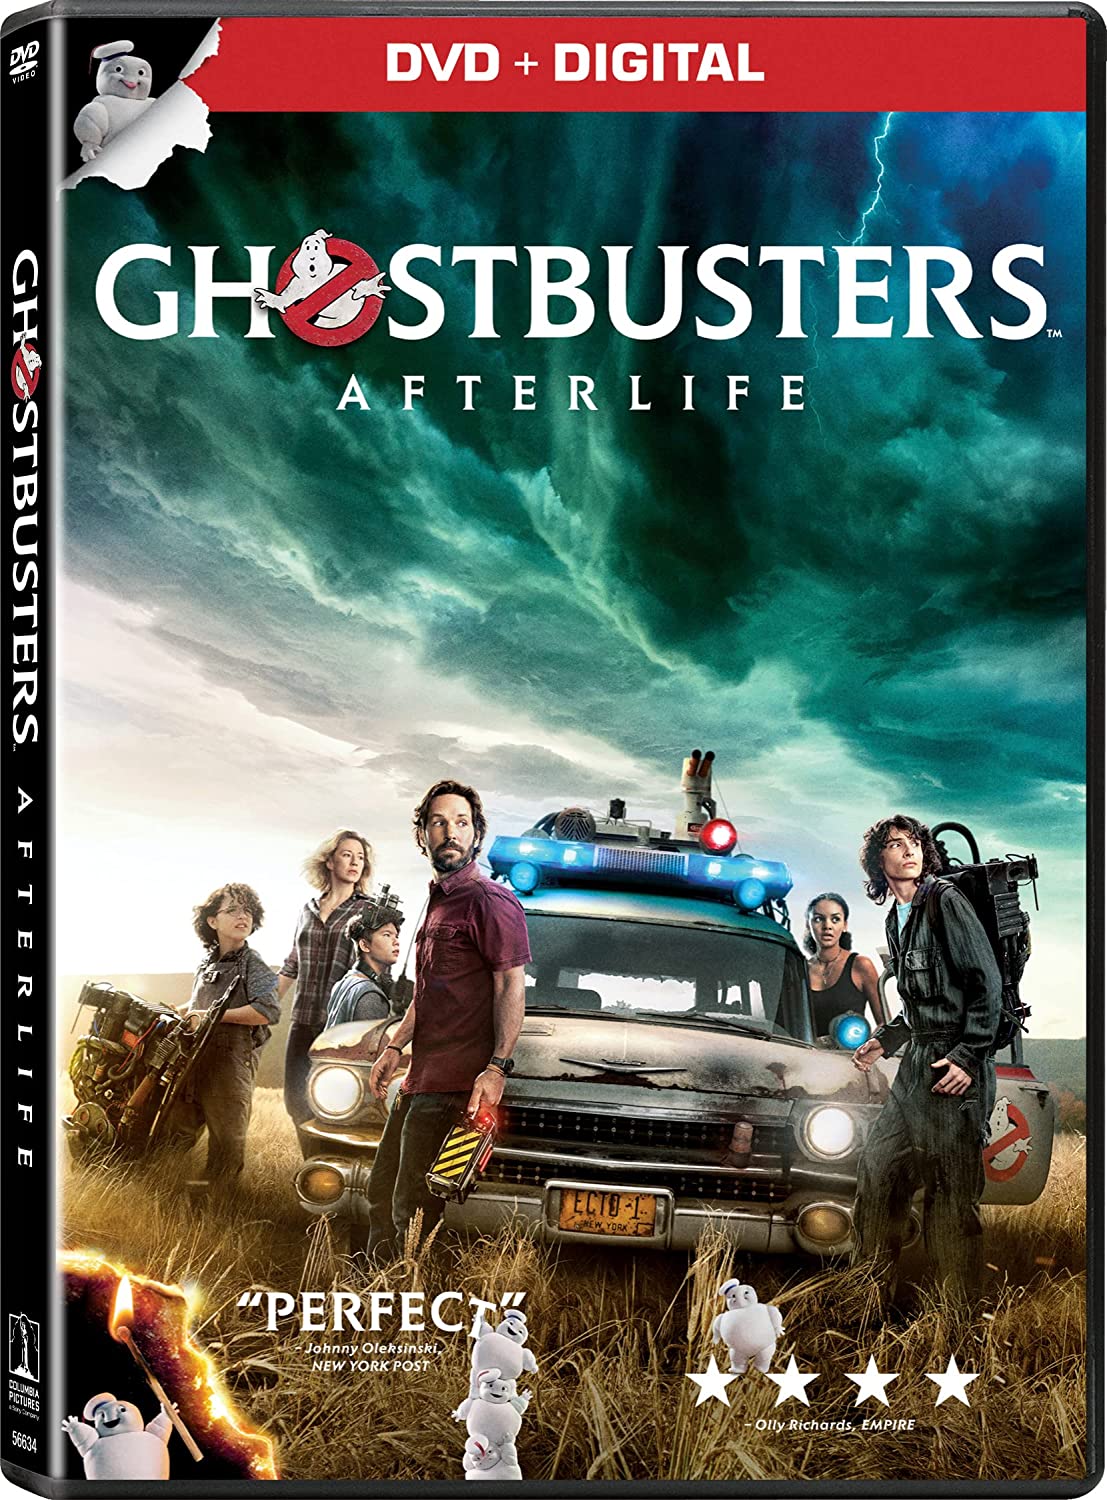 Image for "Ghostbusters Afterlife"